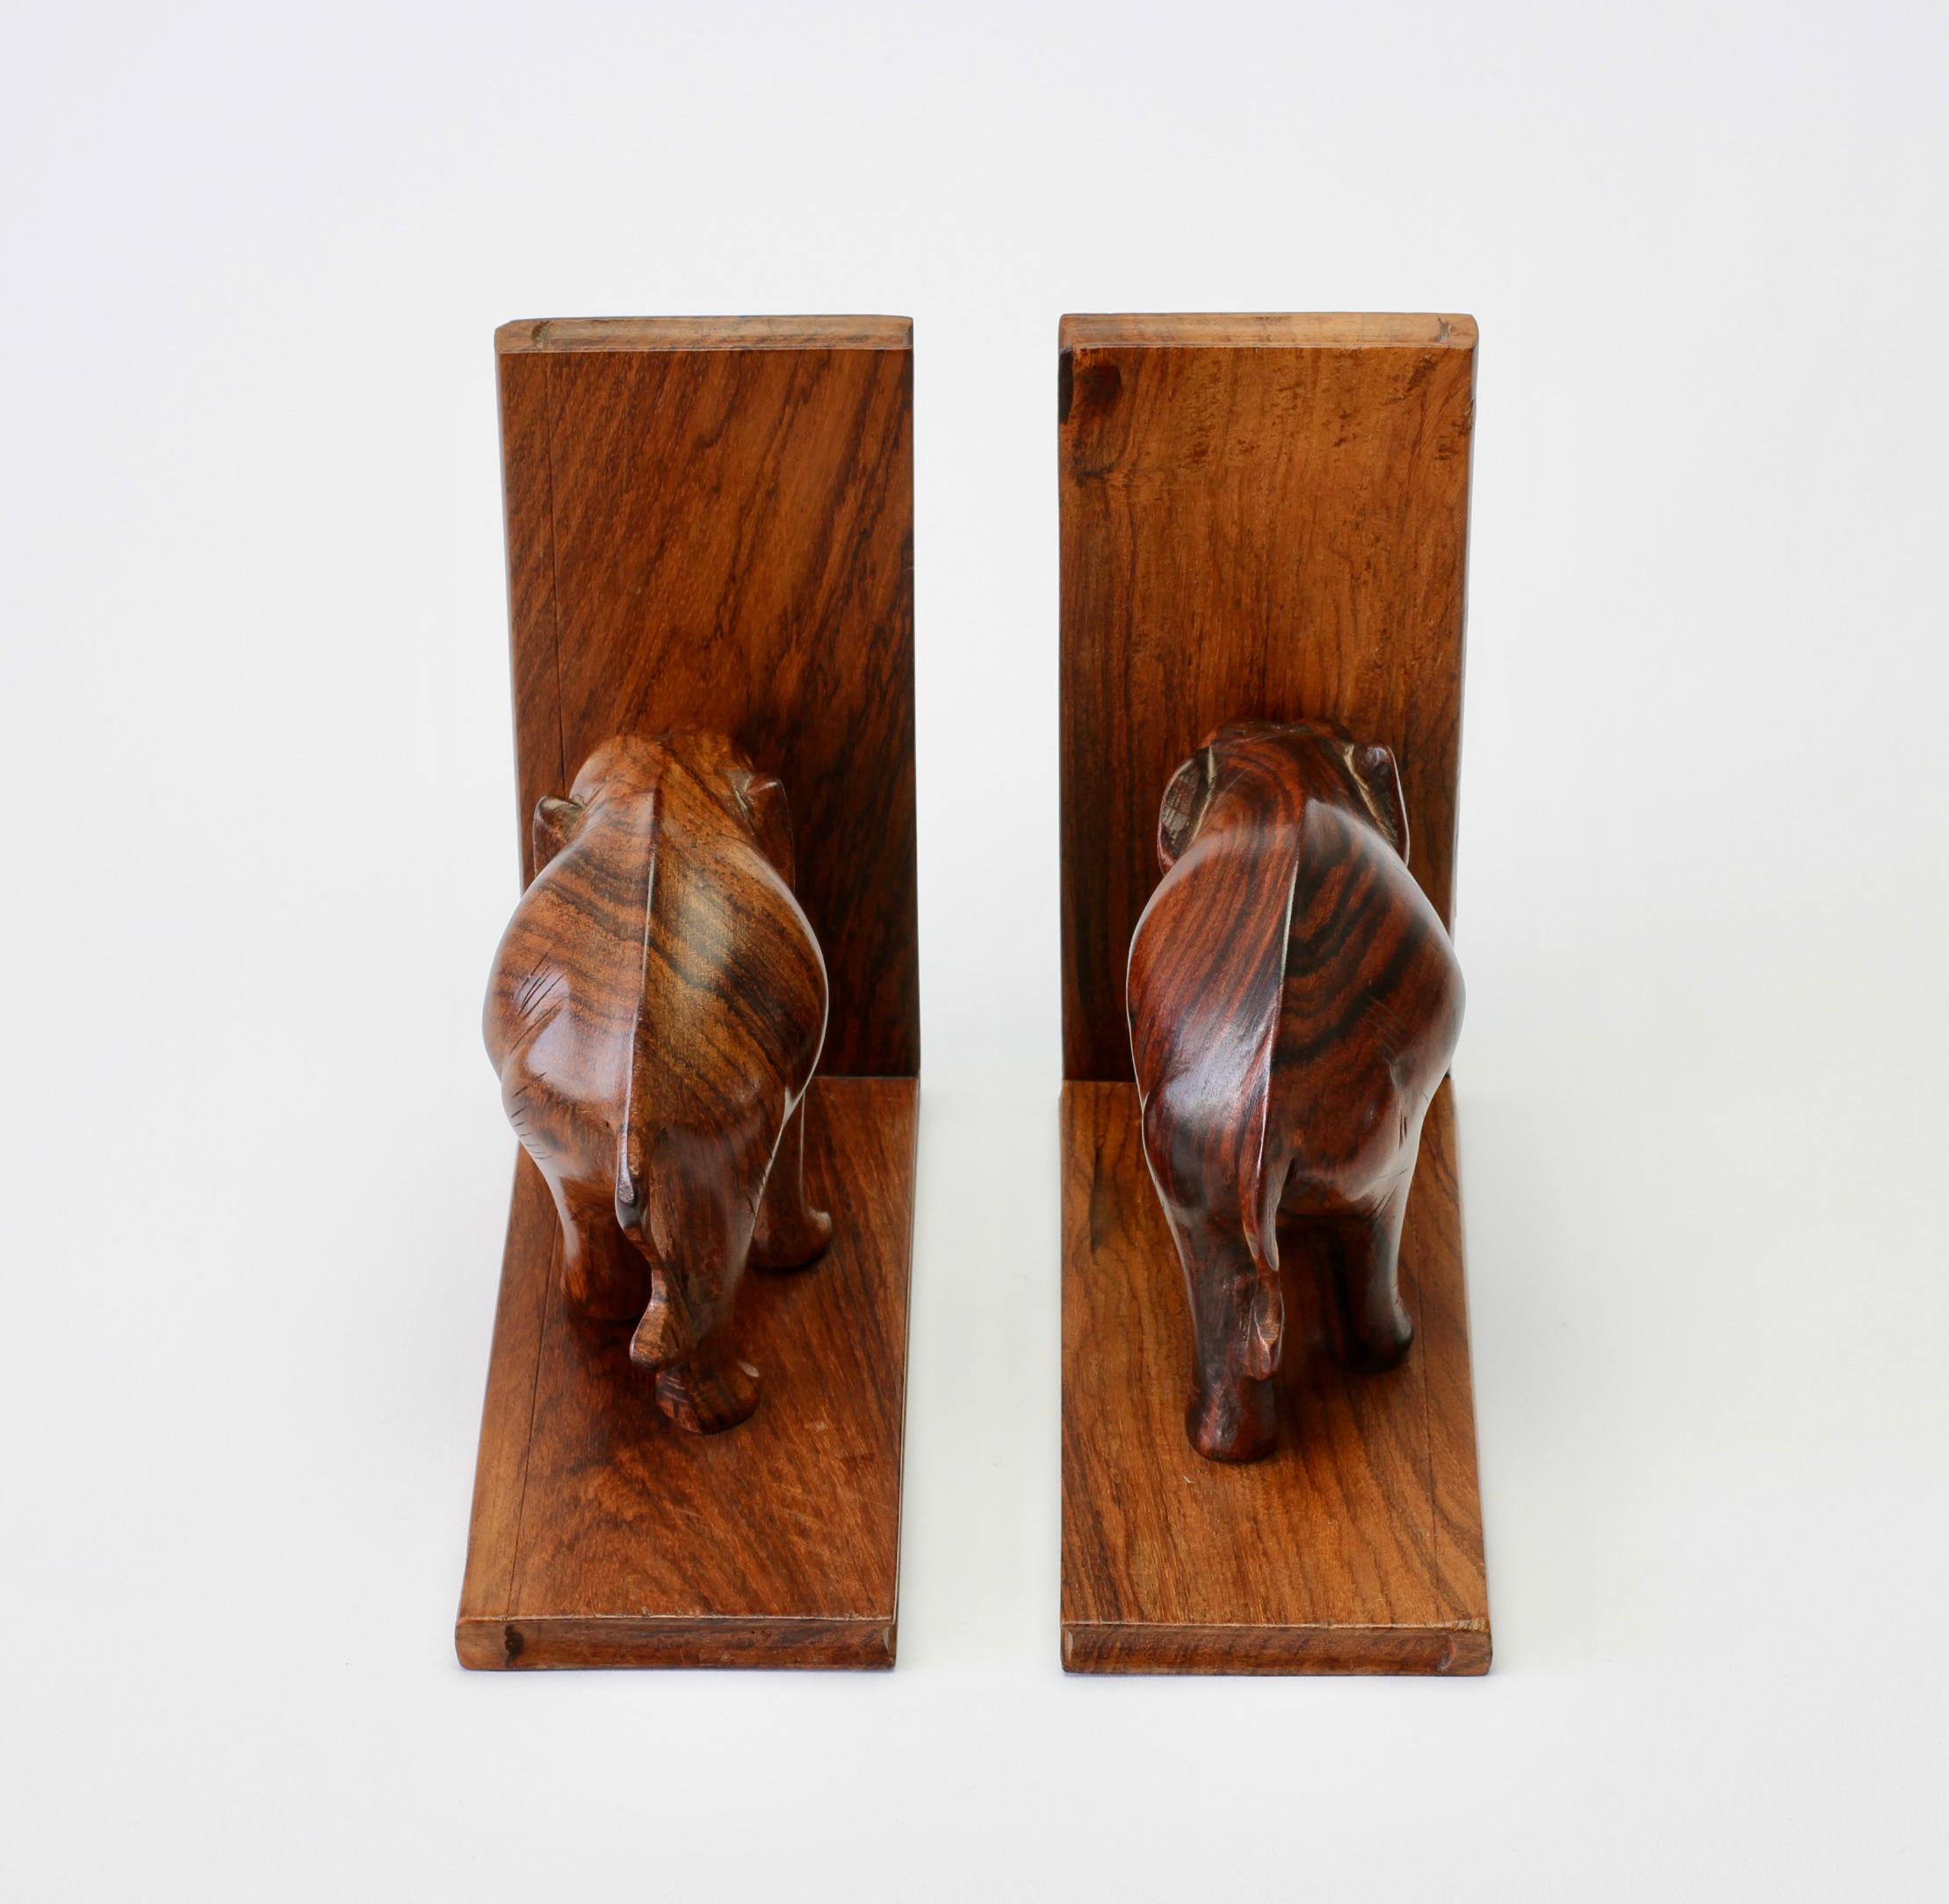 Hand Carved Wooden Book Ends with Elephant Sculptures / Figures, circa 1960s 3